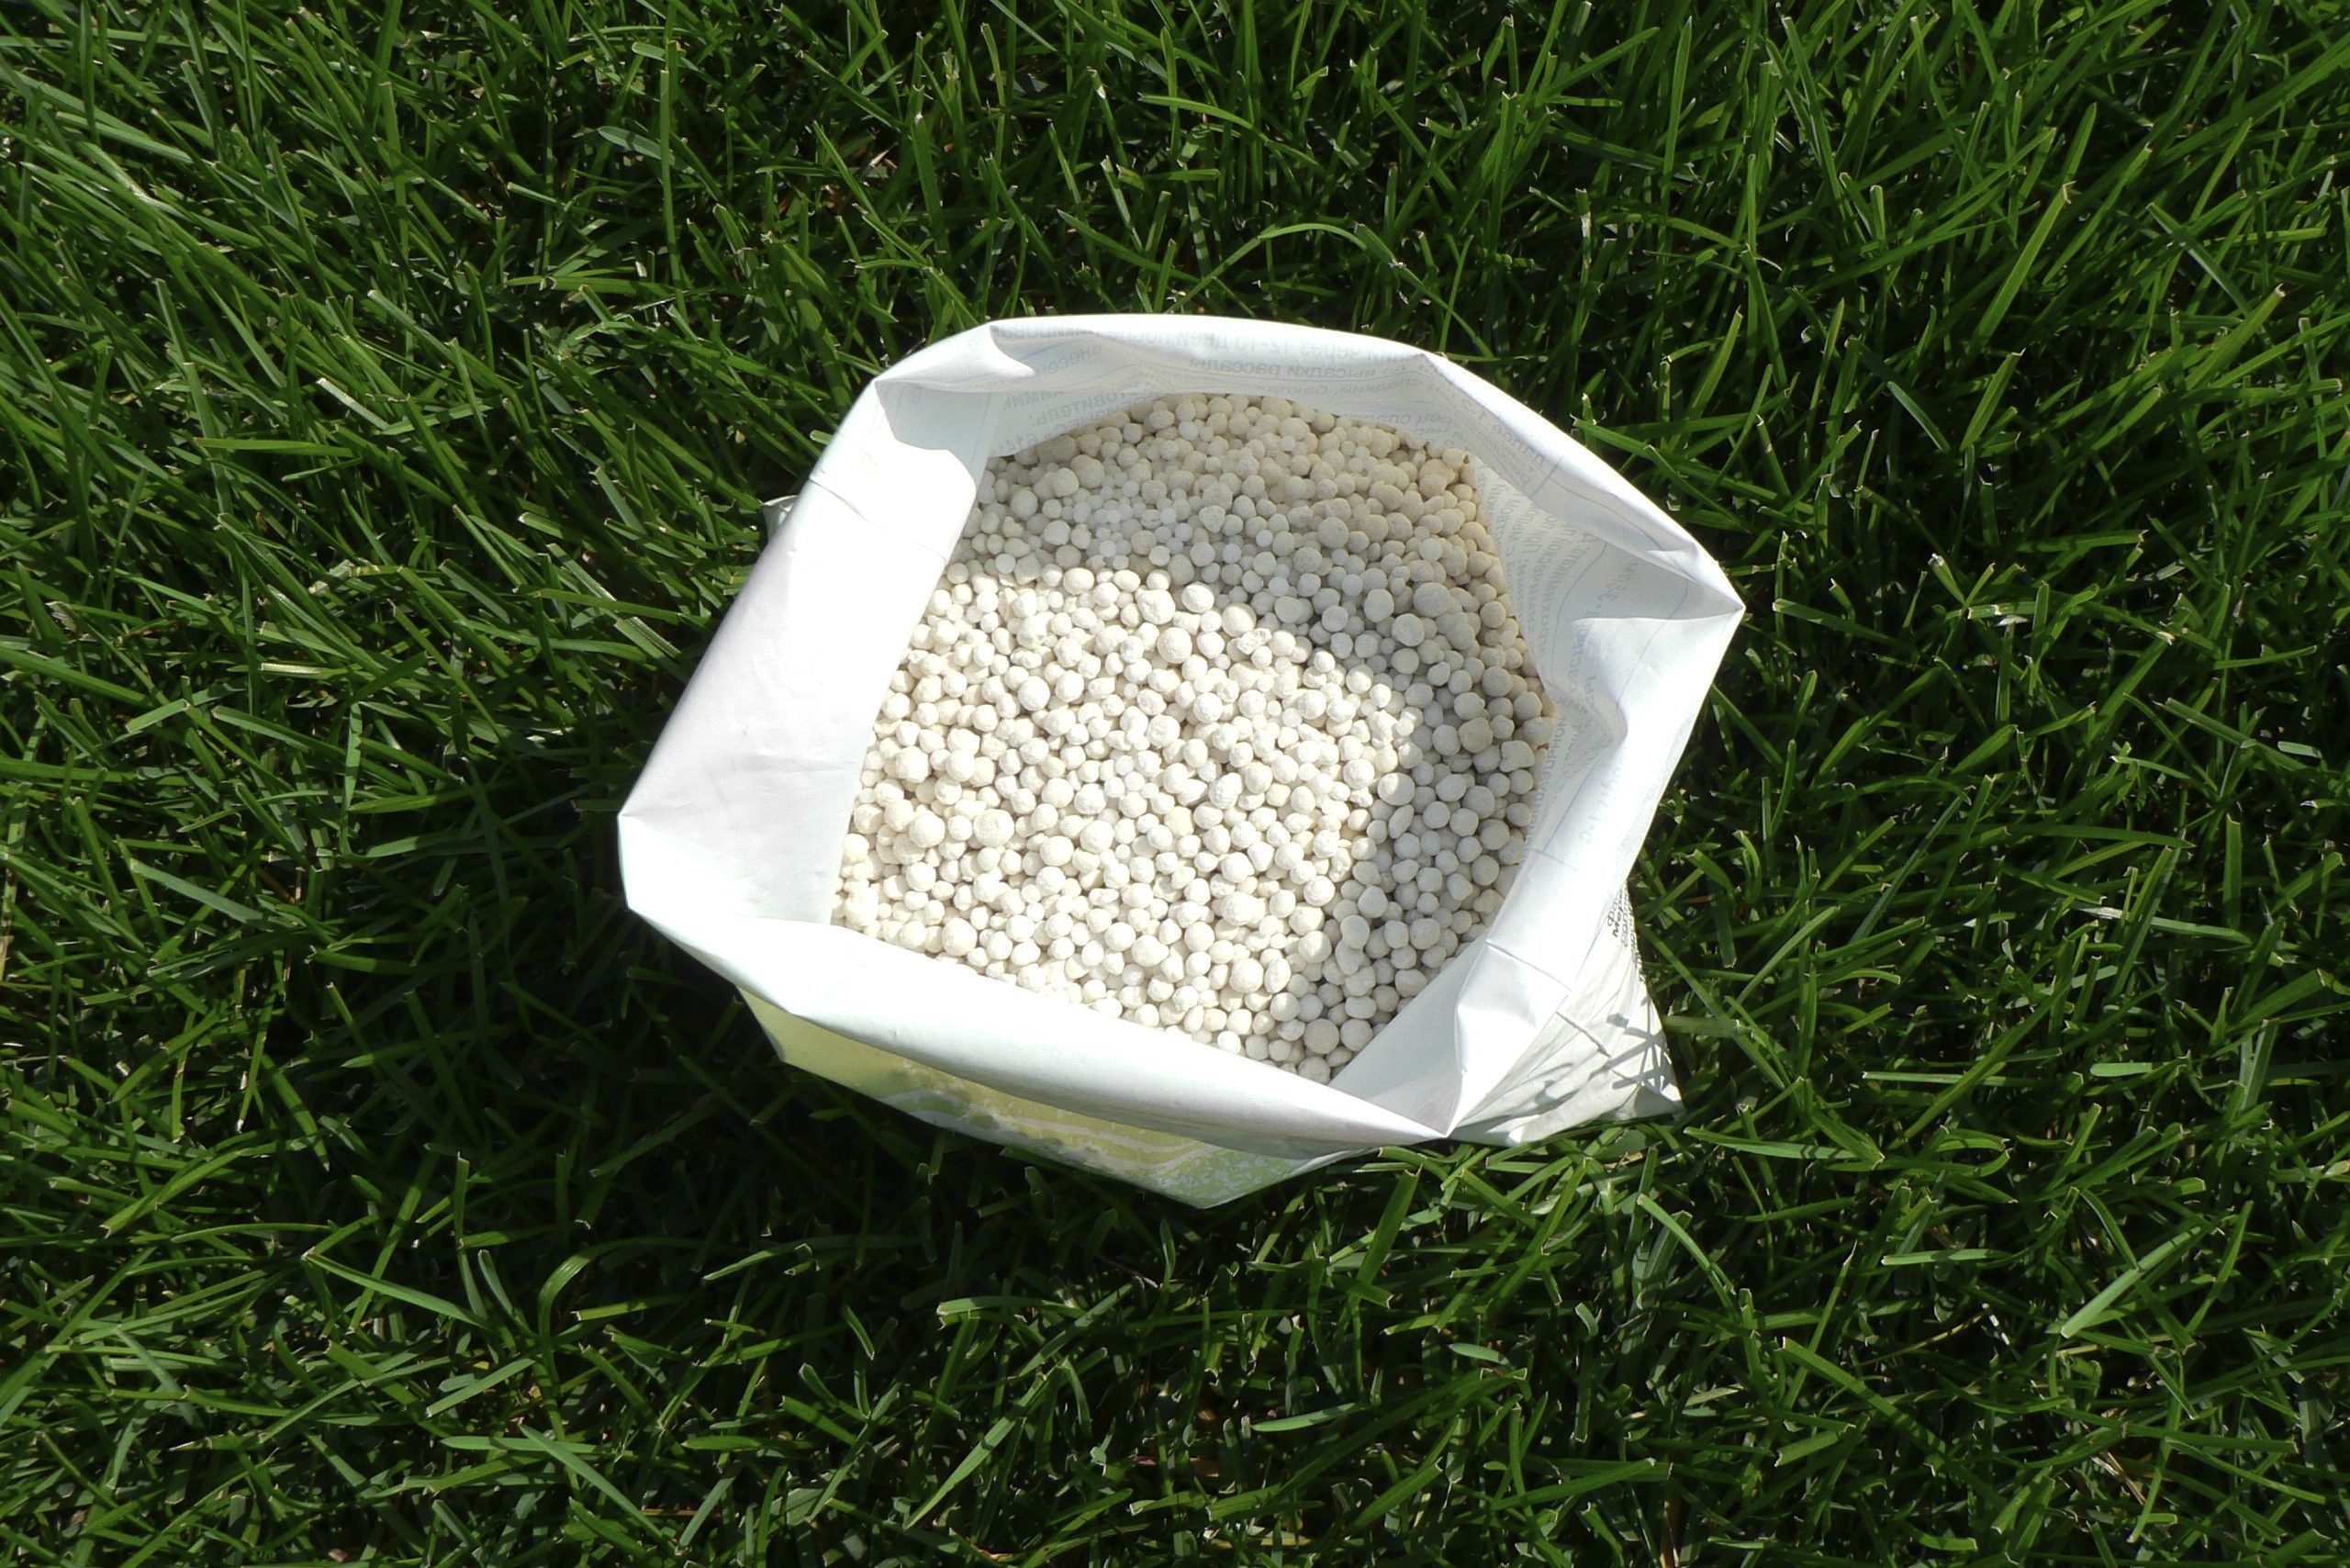 How Can I Fertilize My Lawn Without Chemicals?